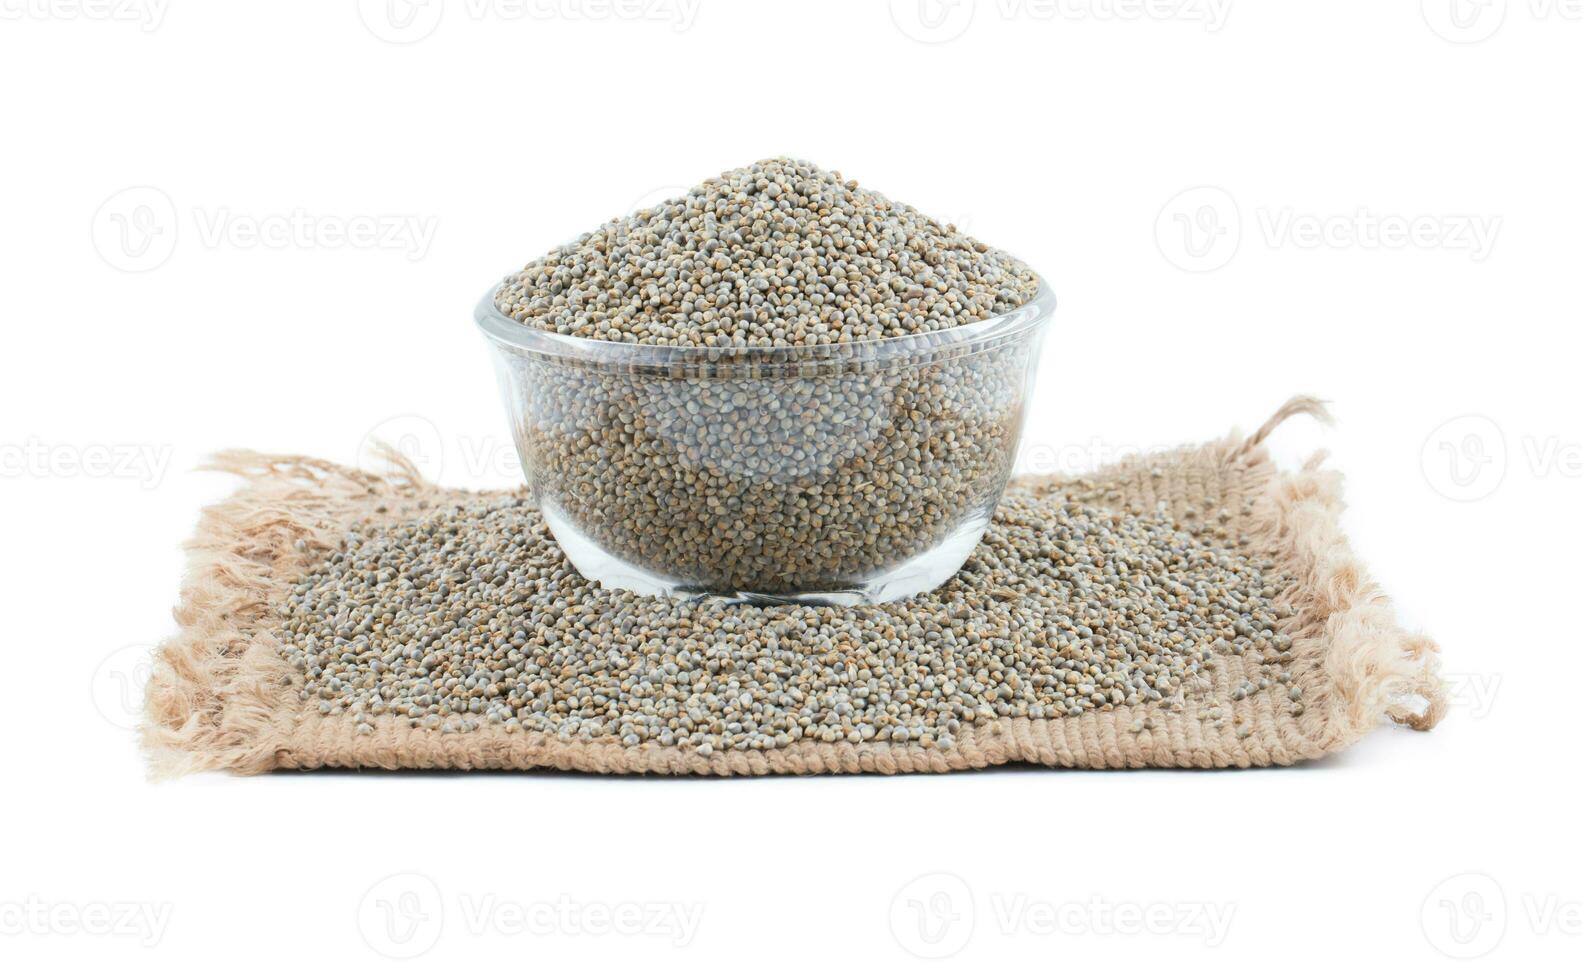 Pearl Millet Seeds on White Background photo